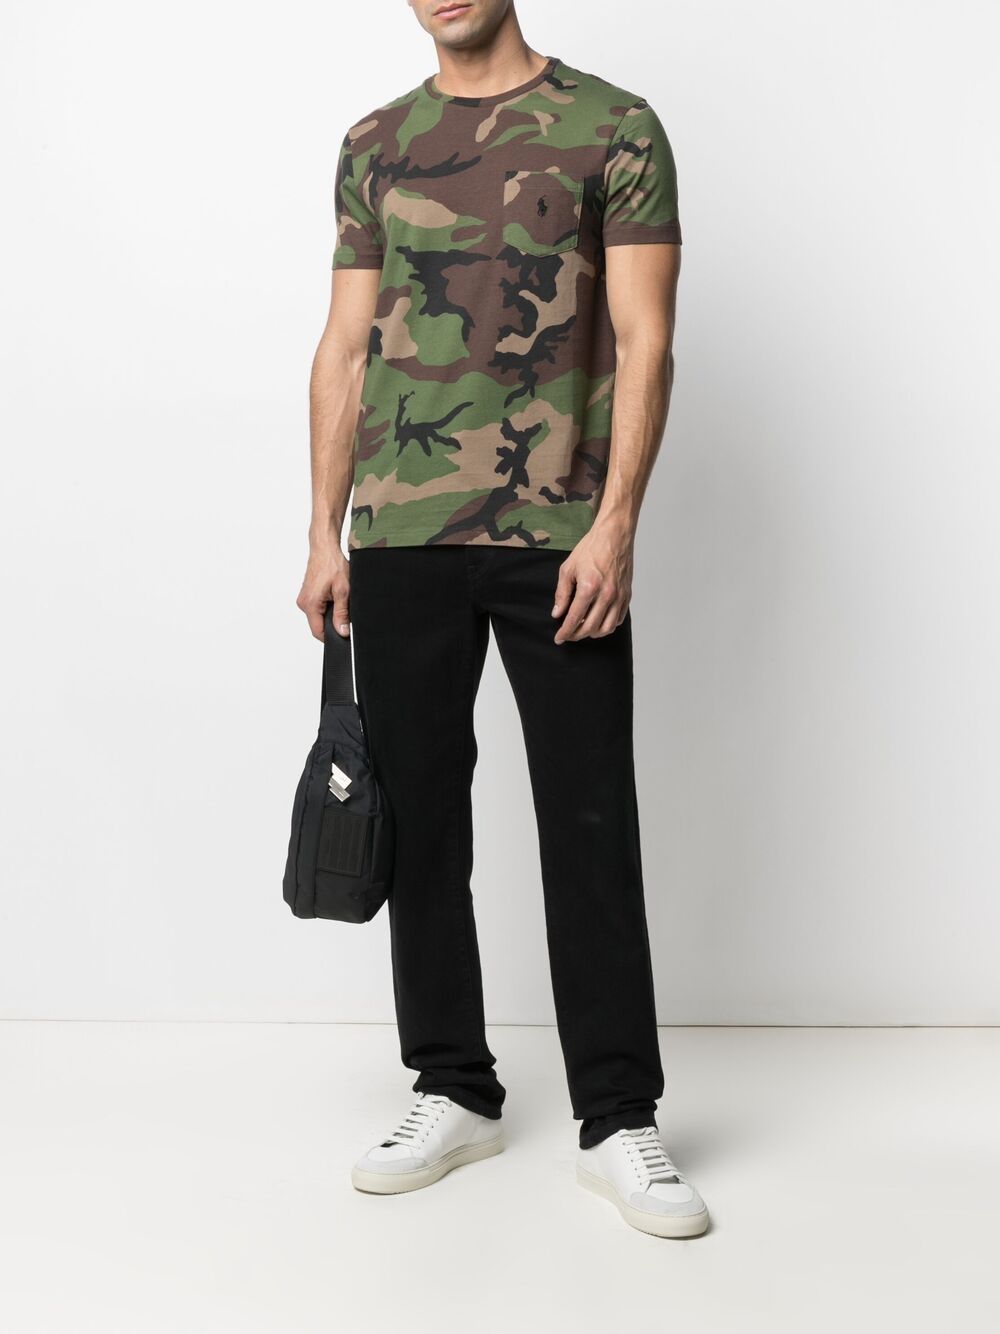 Shop Polo Ralph Lauren camouflage-print cotton T-Shirt with Express  Delivery - FARFETCH